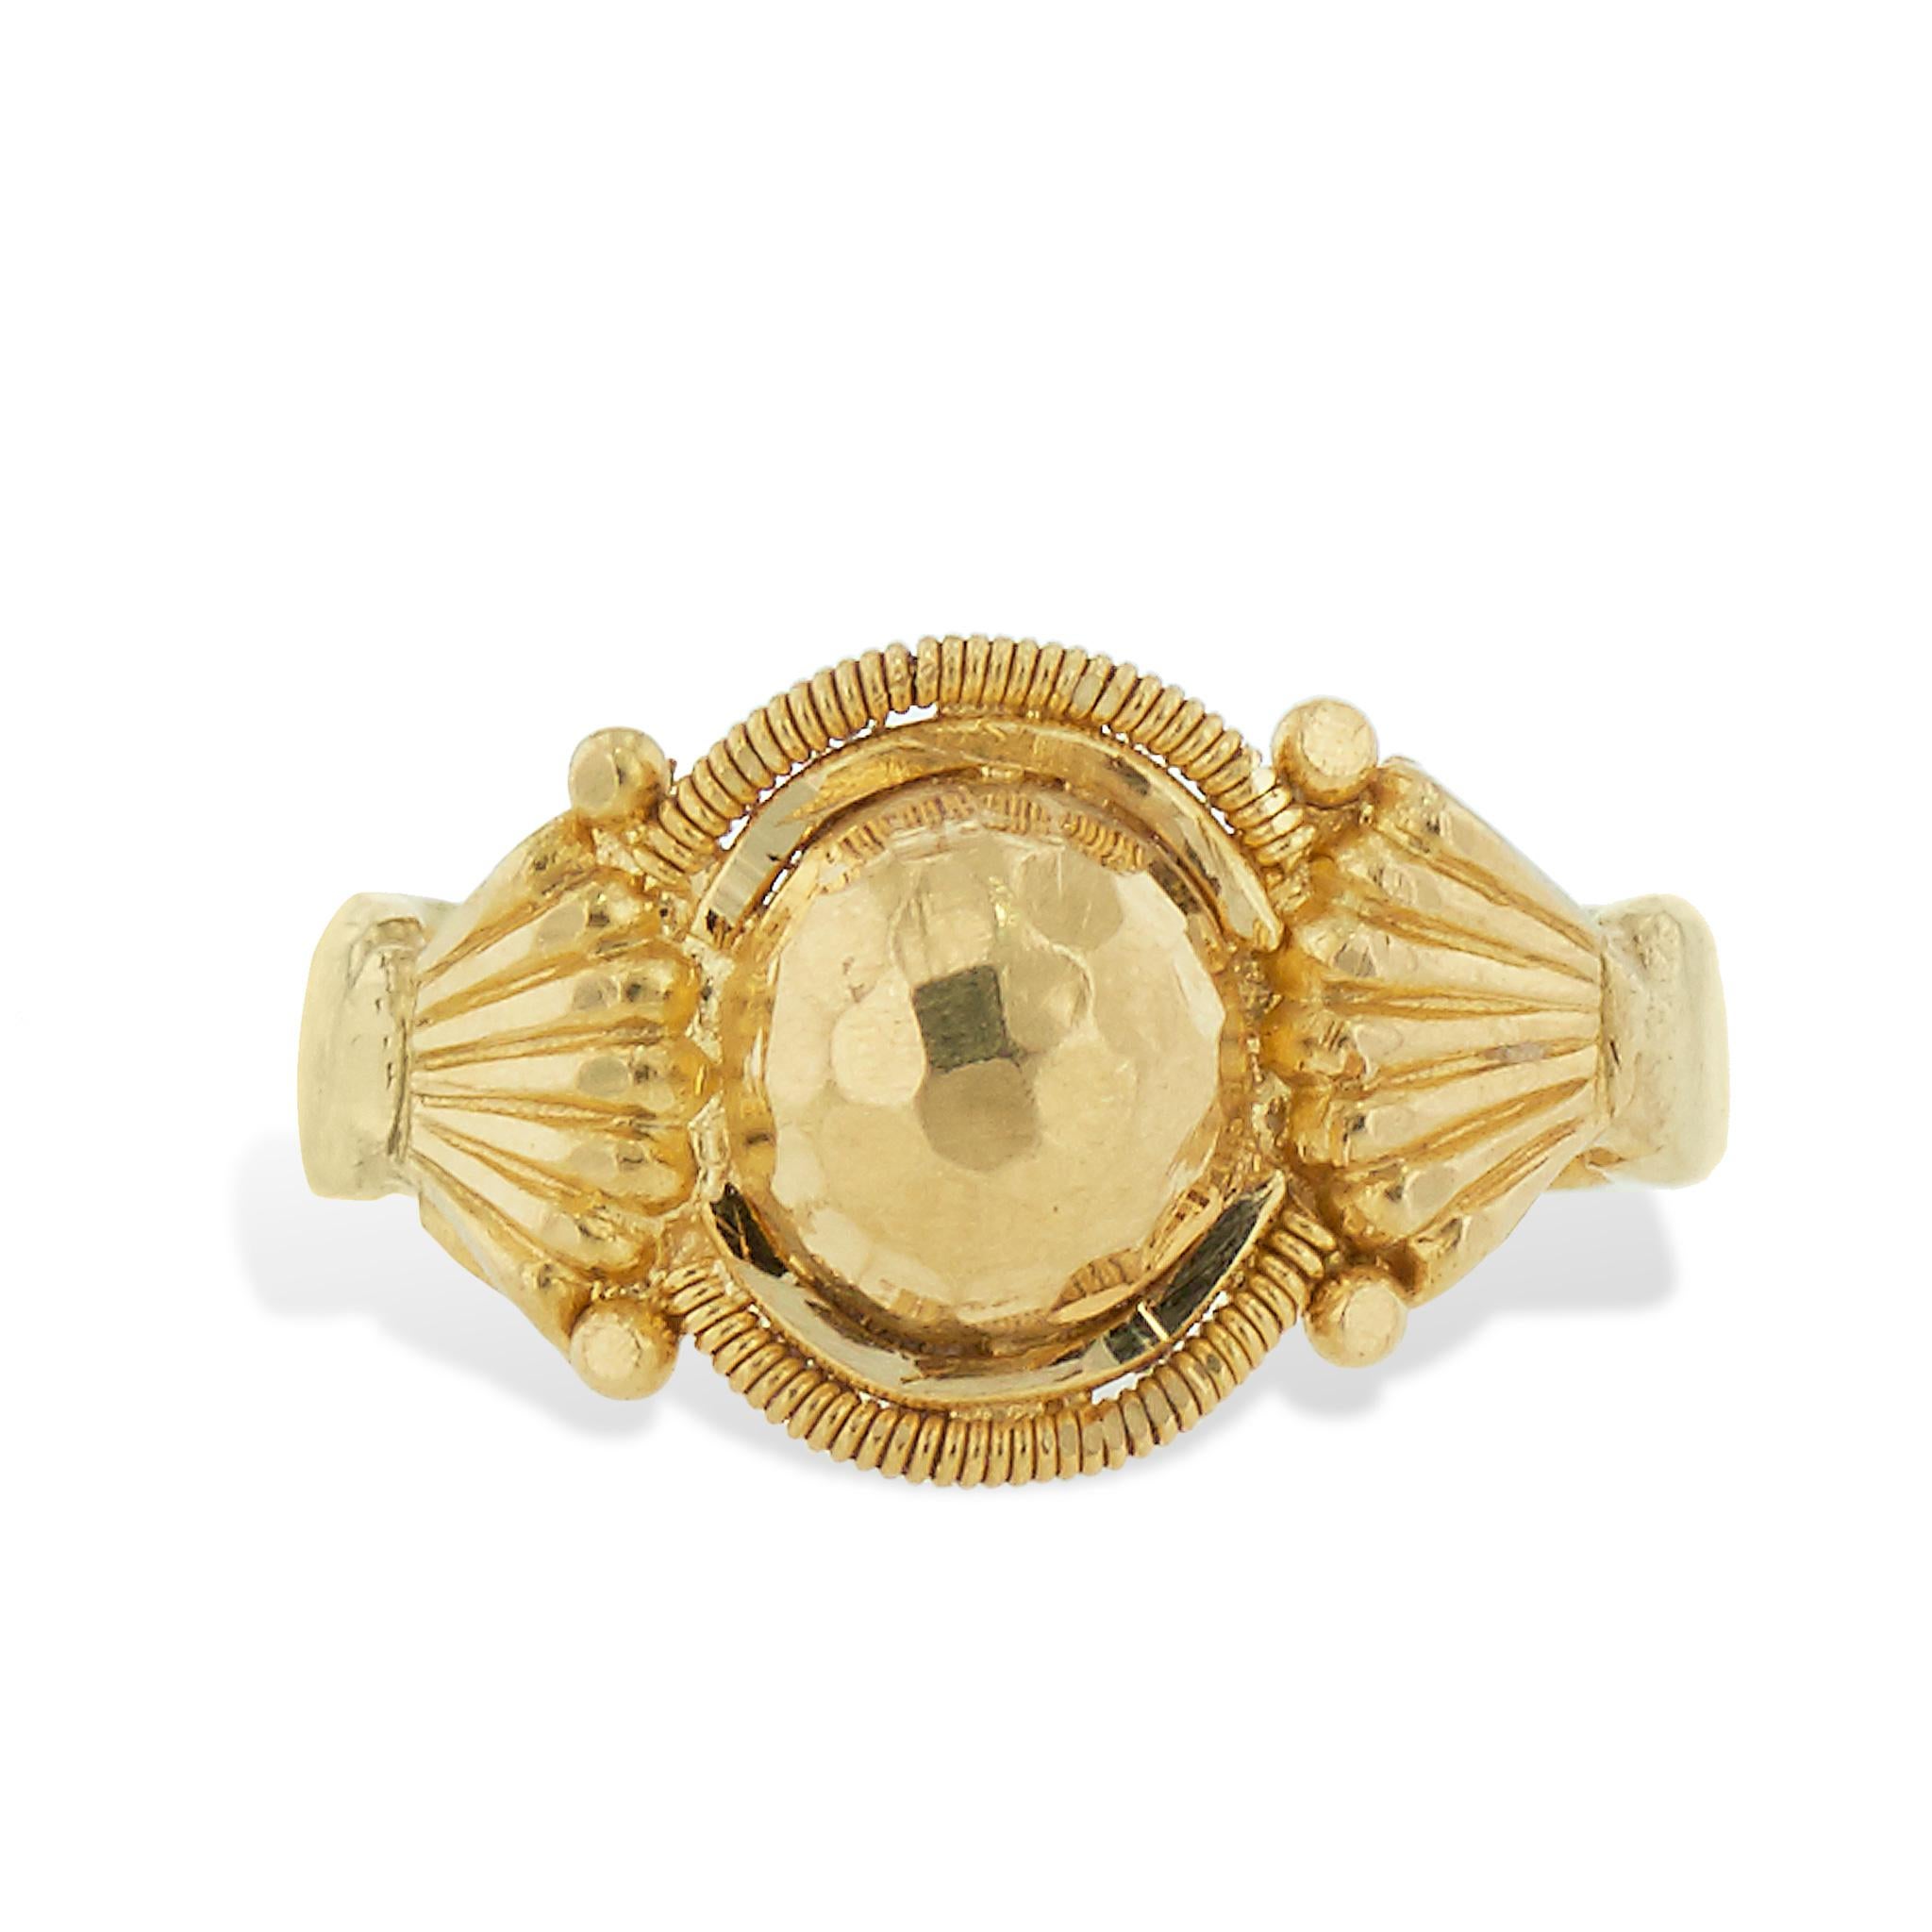 Estate Indian 22 Karat Yellow Gold Estate Ring In Excellent Condition For Sale In Miami, FL